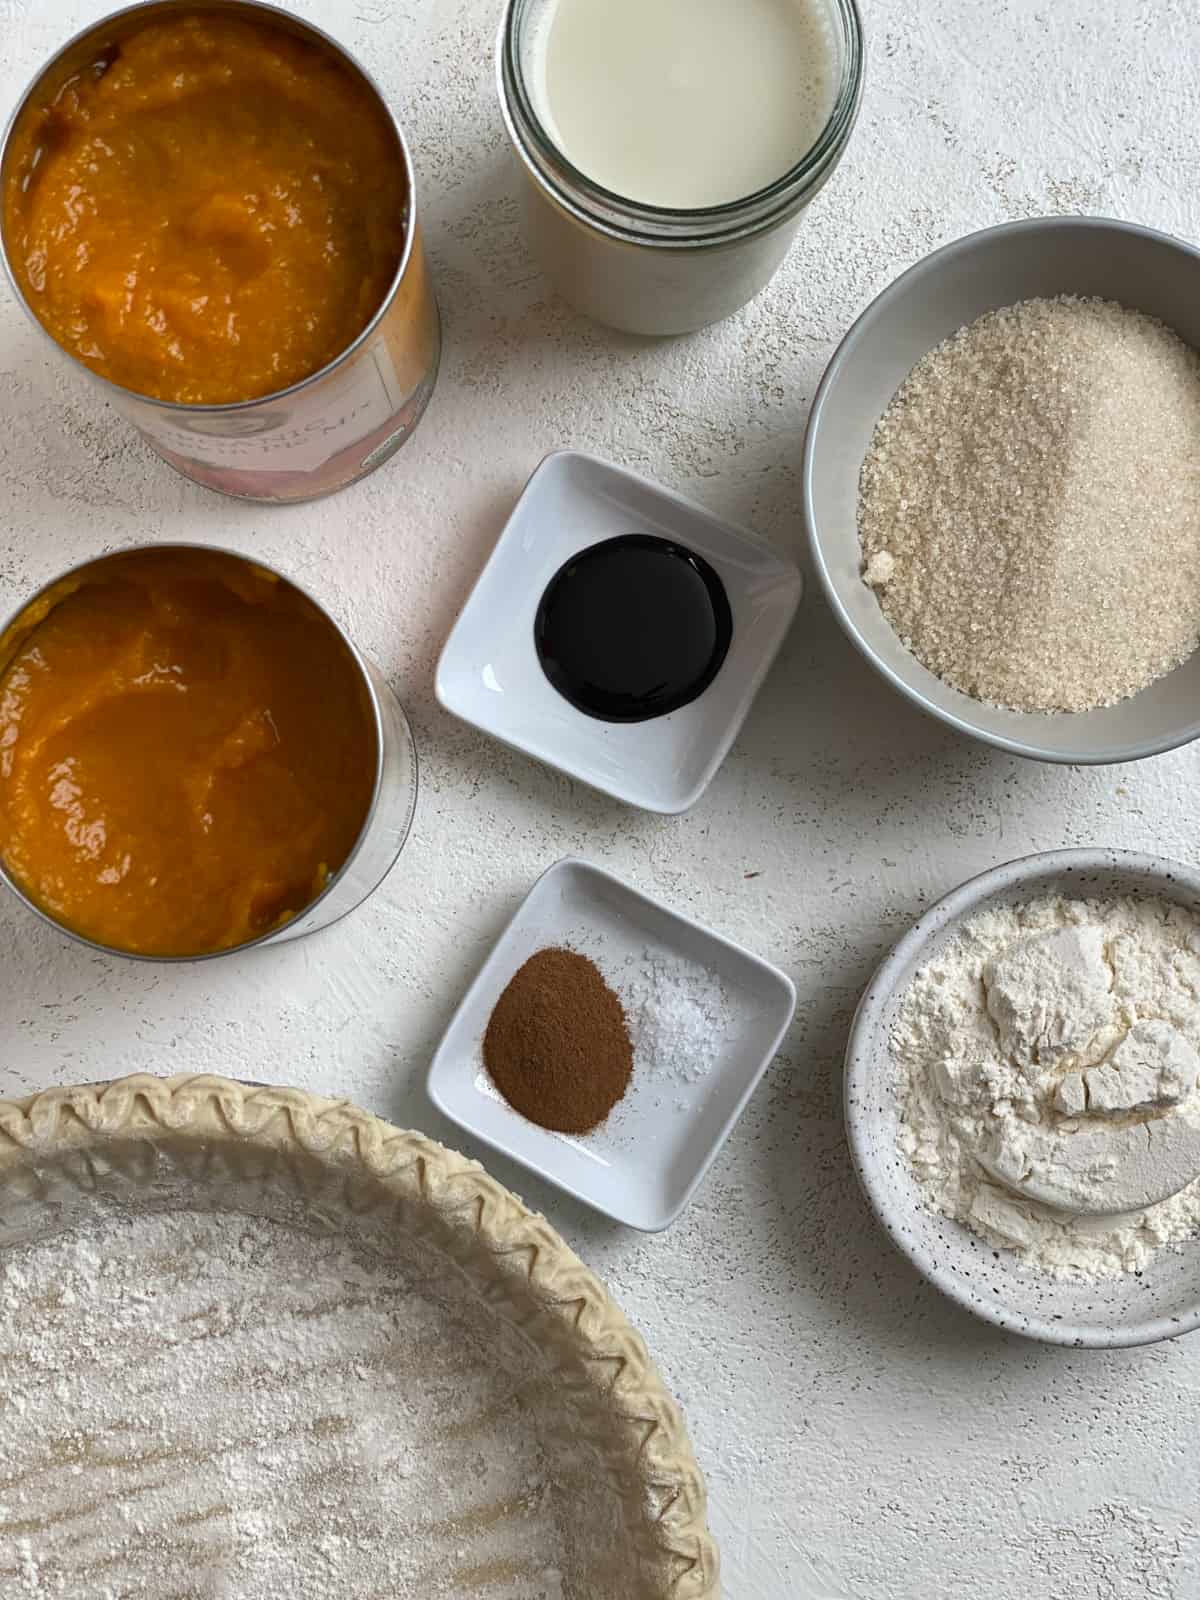 ingredients for Easy Vegan Pumpkin Pie measured out a،nst a white surface